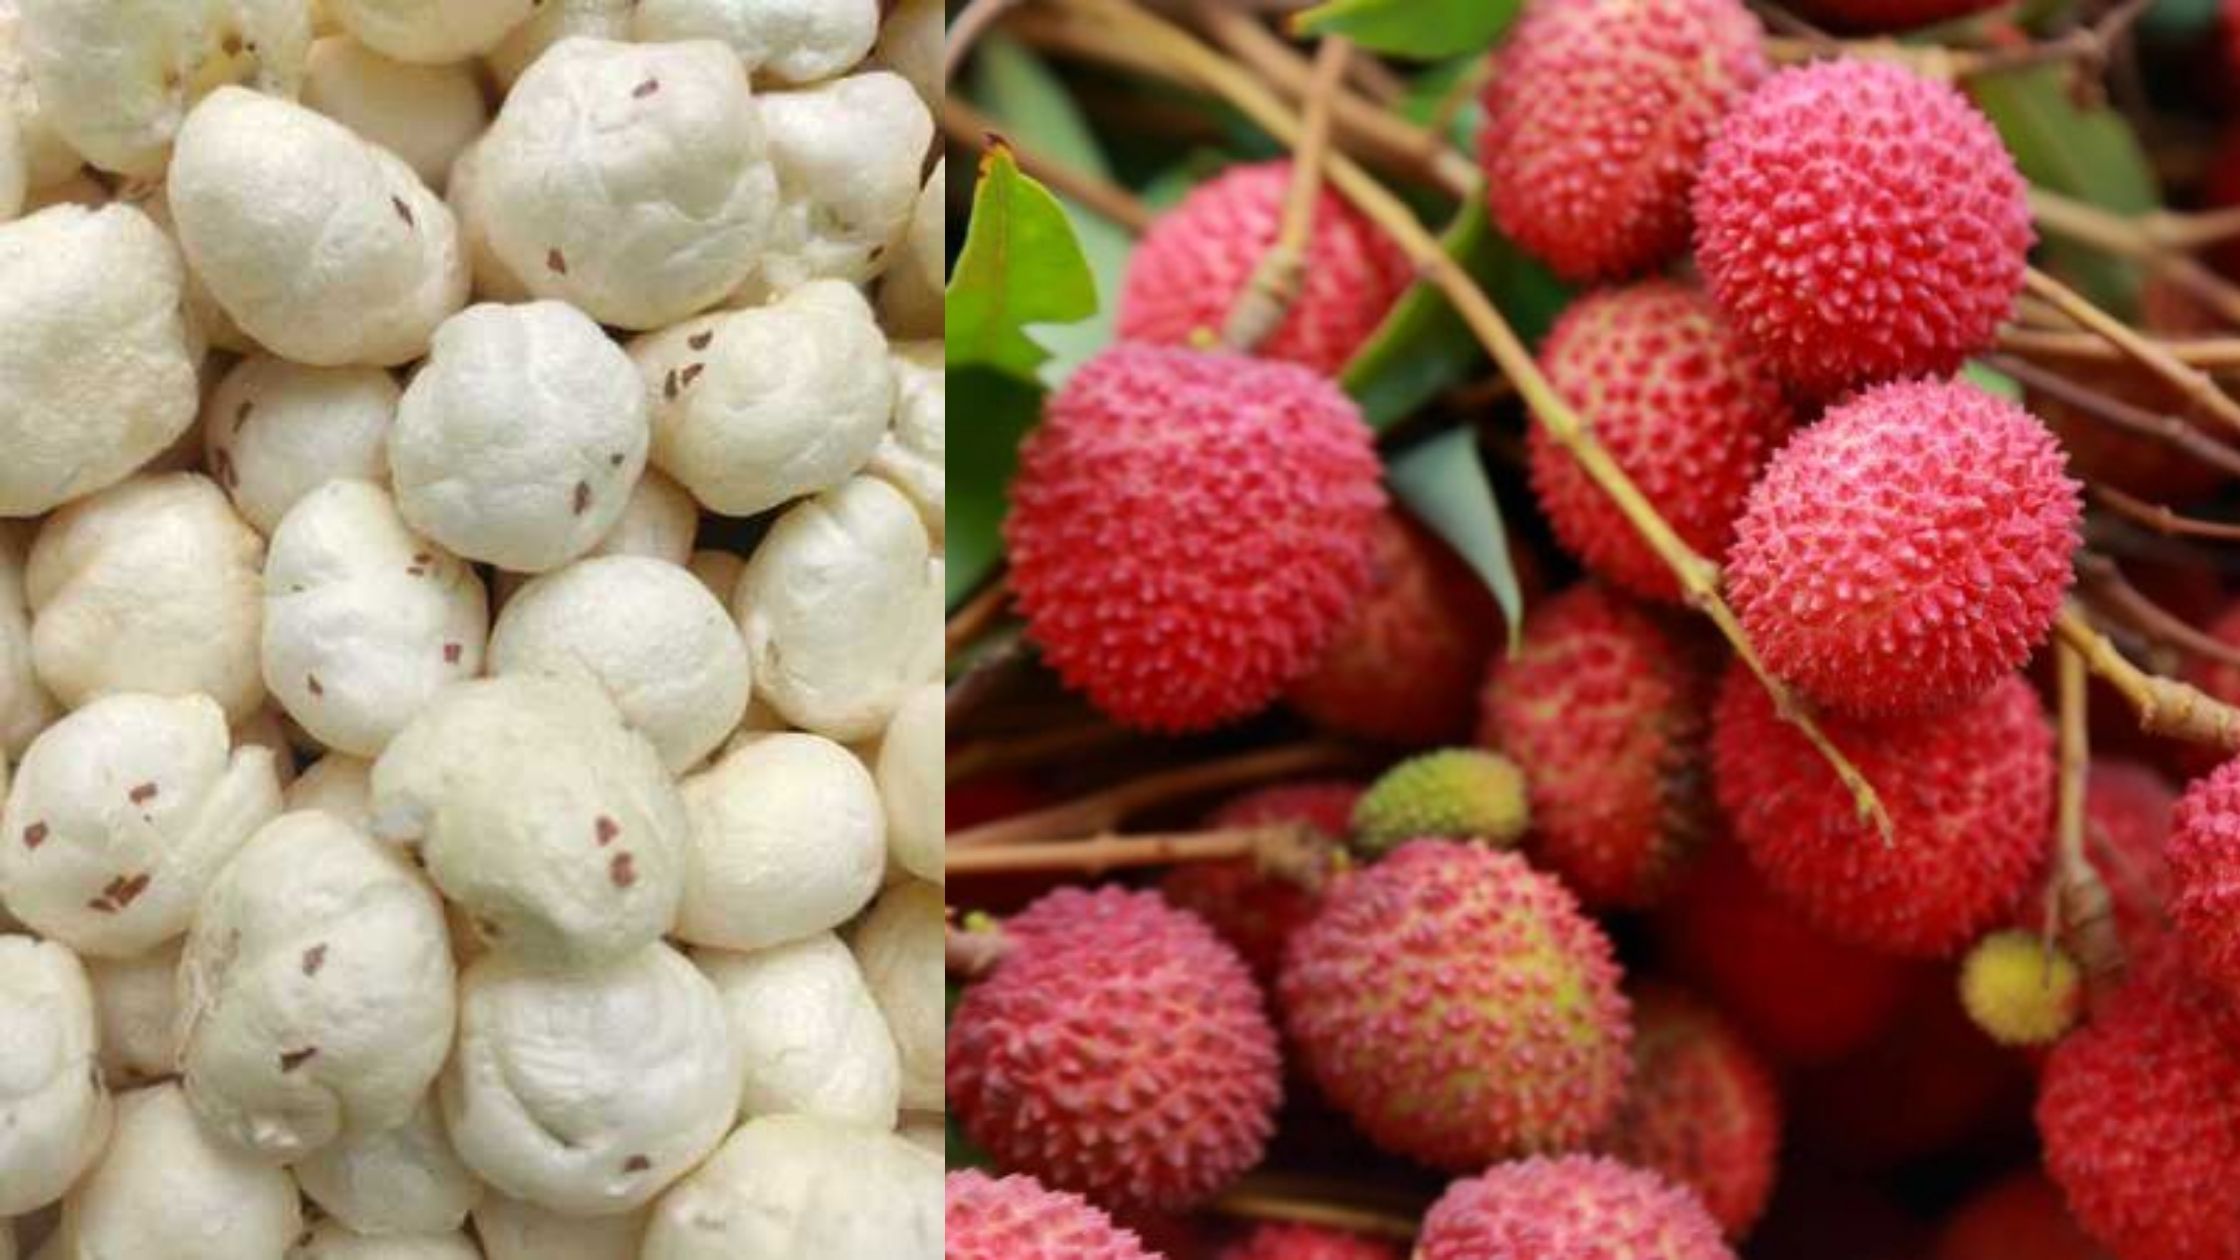 network of food parks of Makhana and Litchi will be formed in Bihar